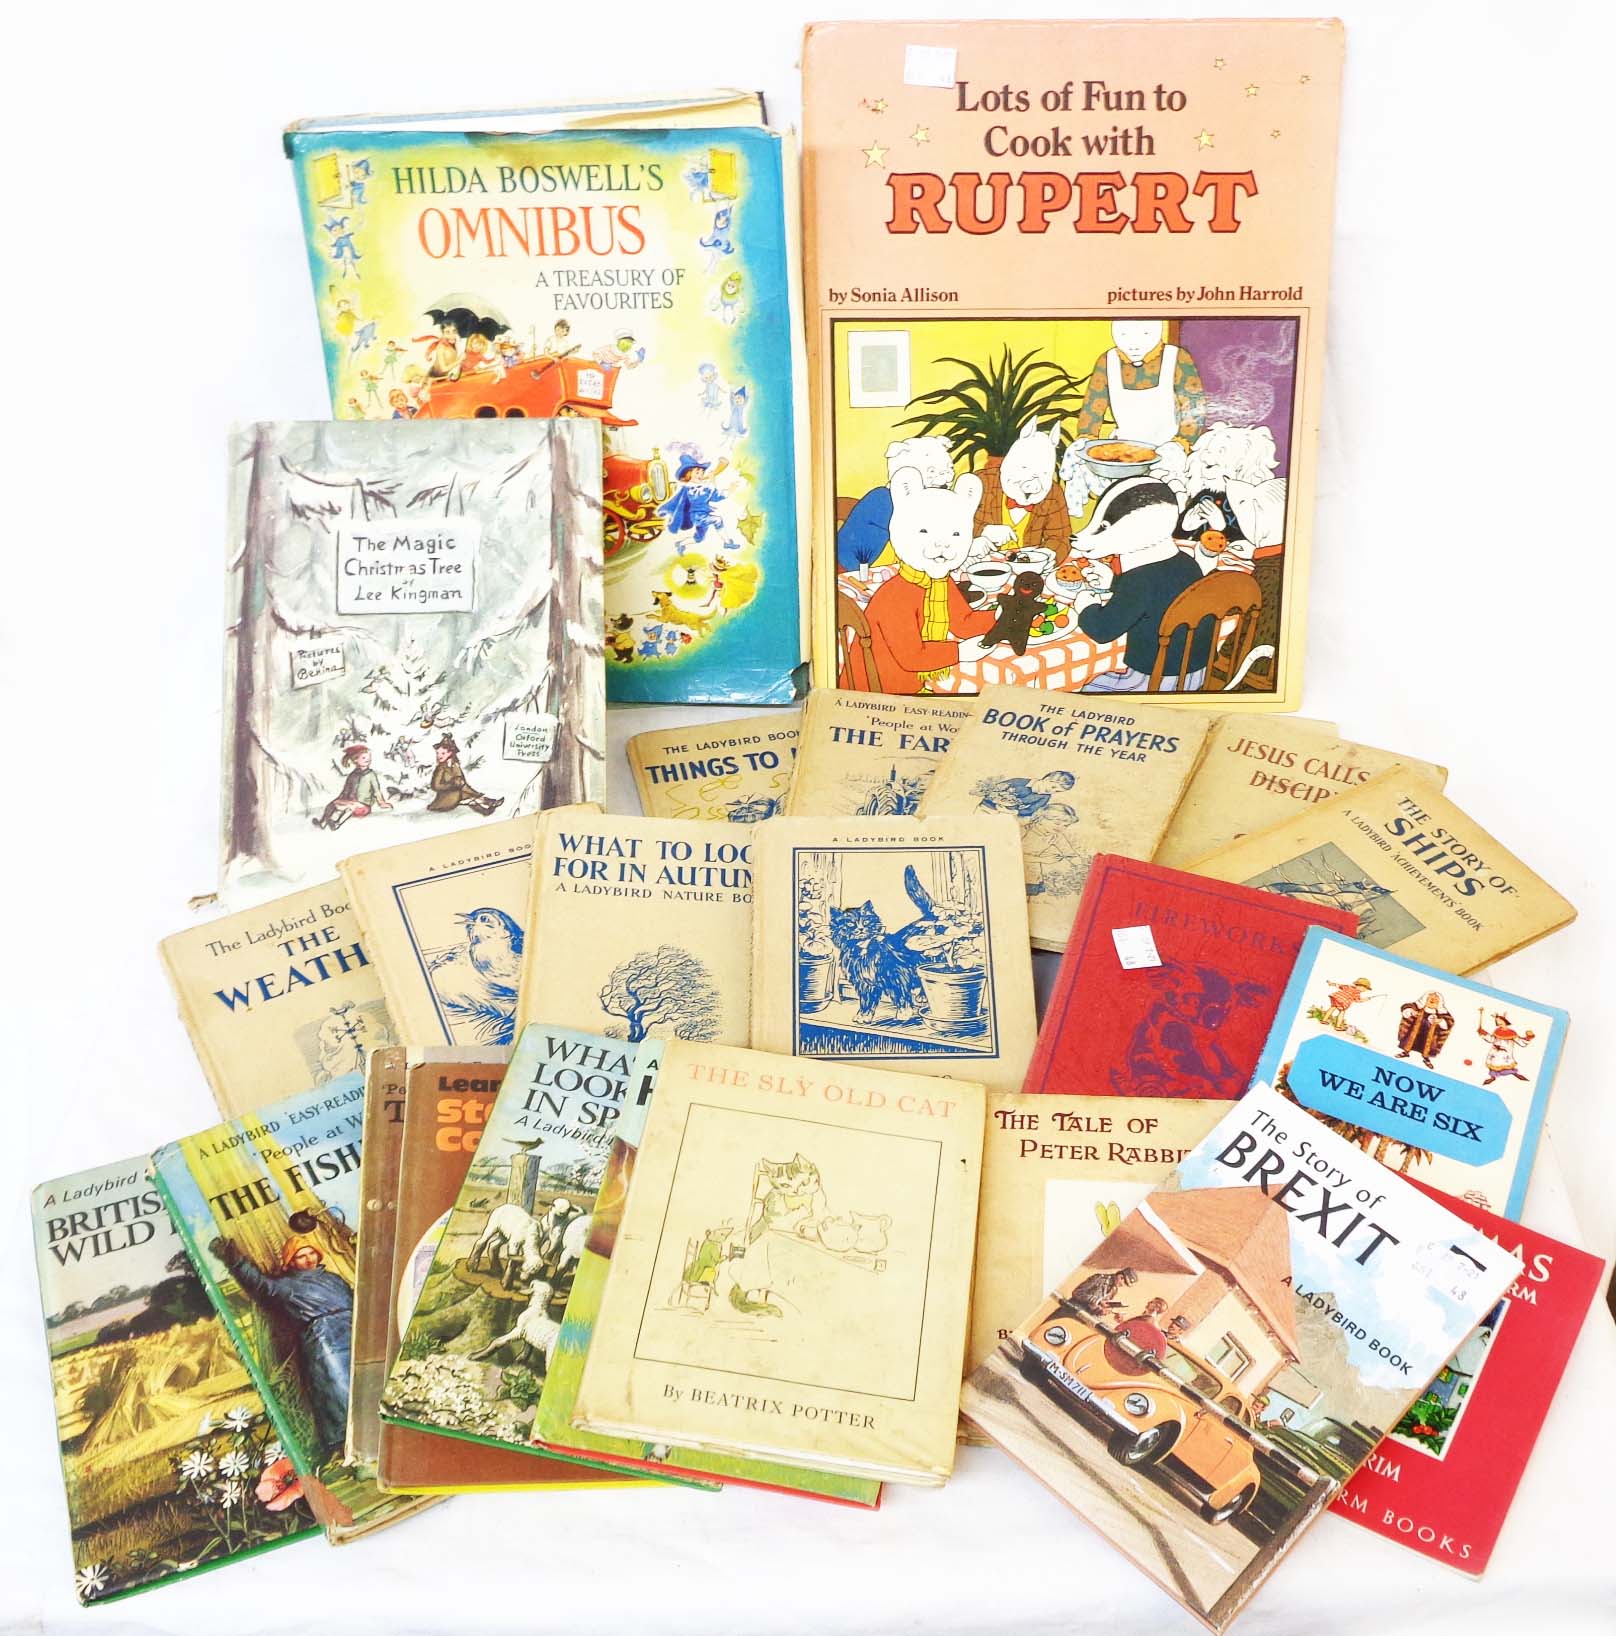 A collection of vintage childrens' titles including Ladybird readers with buff covers, etc.